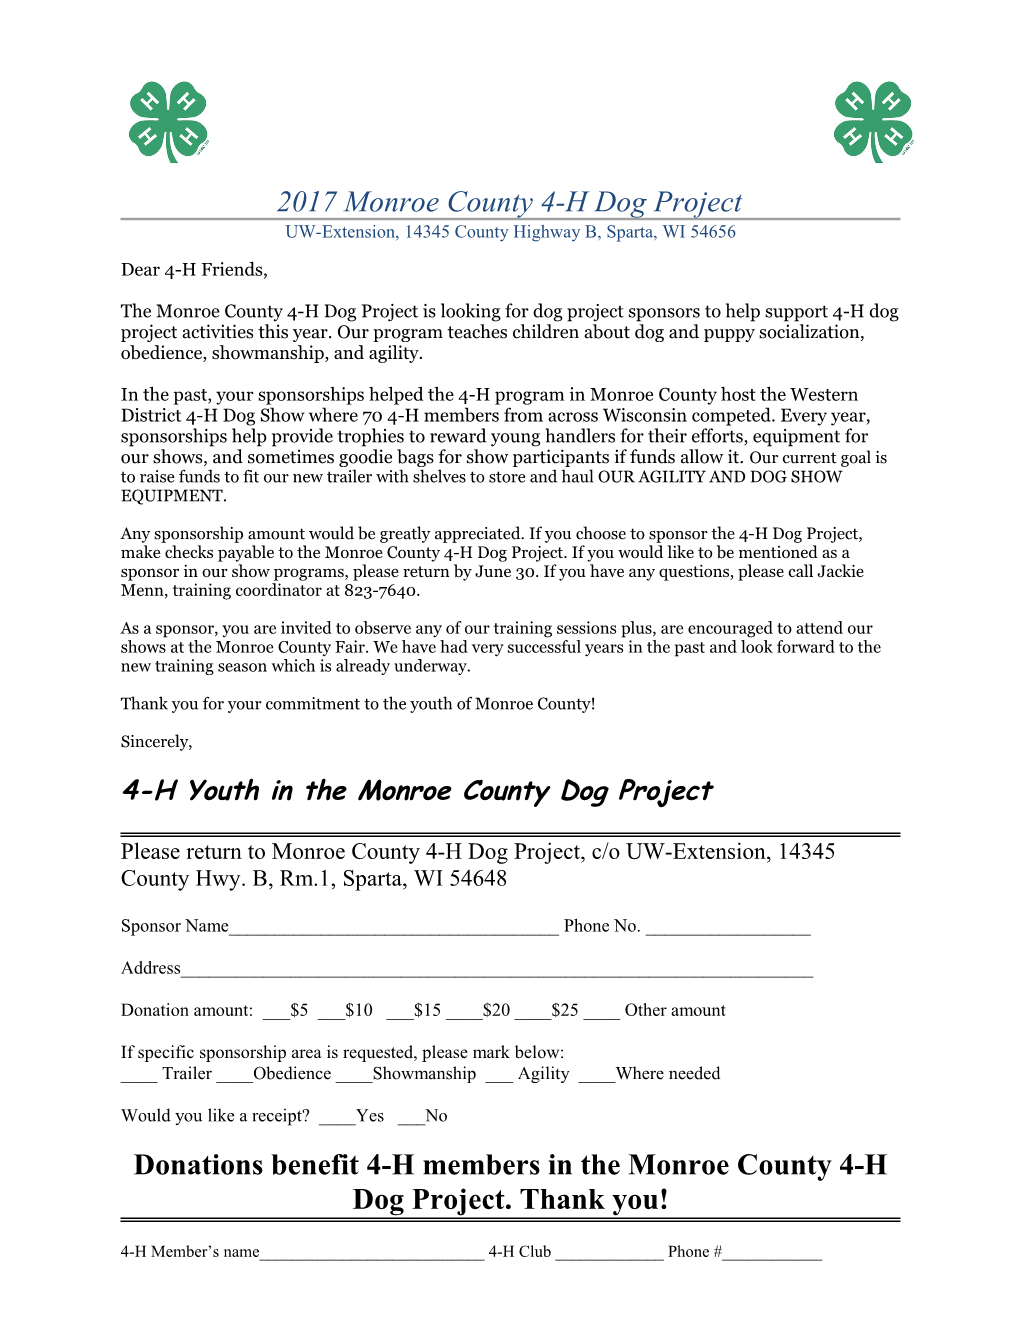 Monroe County 4-H Dog Project s1